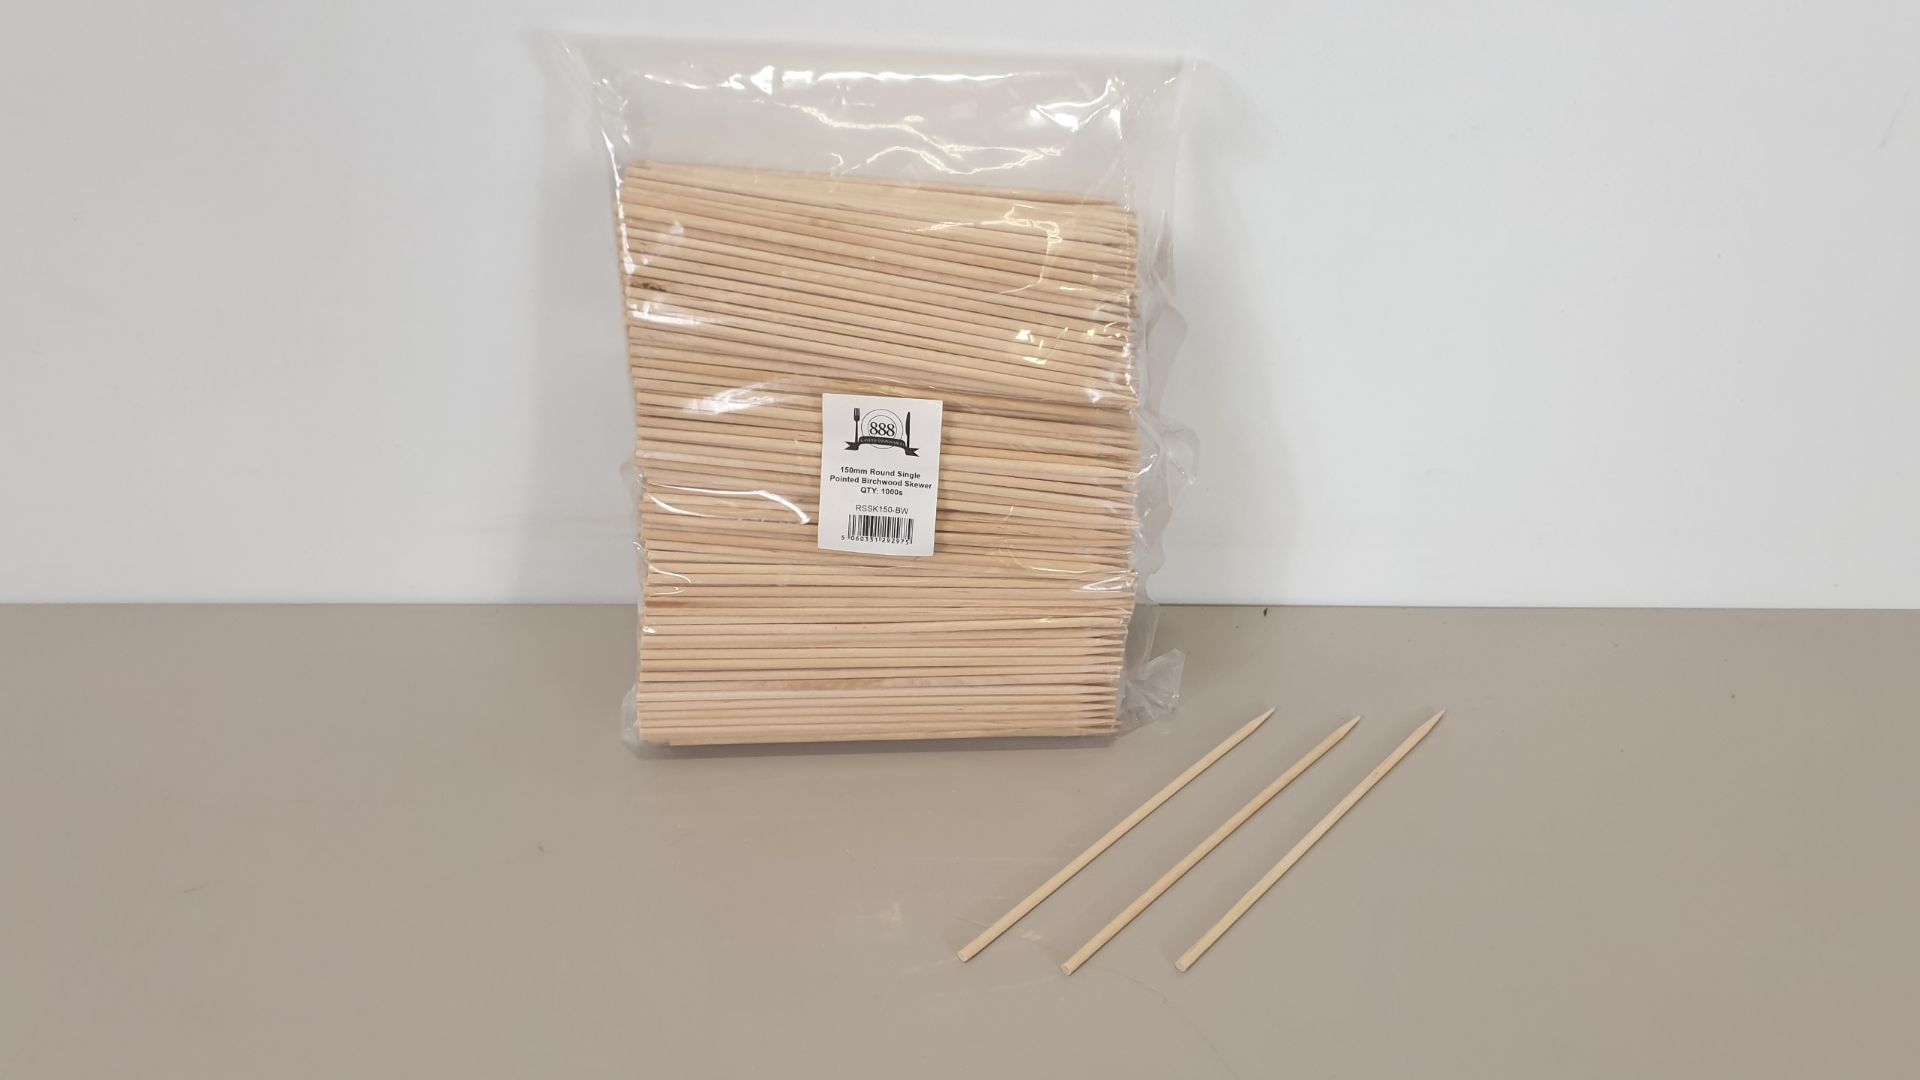 10000 X 150 MM ROUND SINGLE POINTED BIRCHWOOD SKEWERS (IDEAL FOR BBQs) - (10 X 1000) - IN 1 CARTON